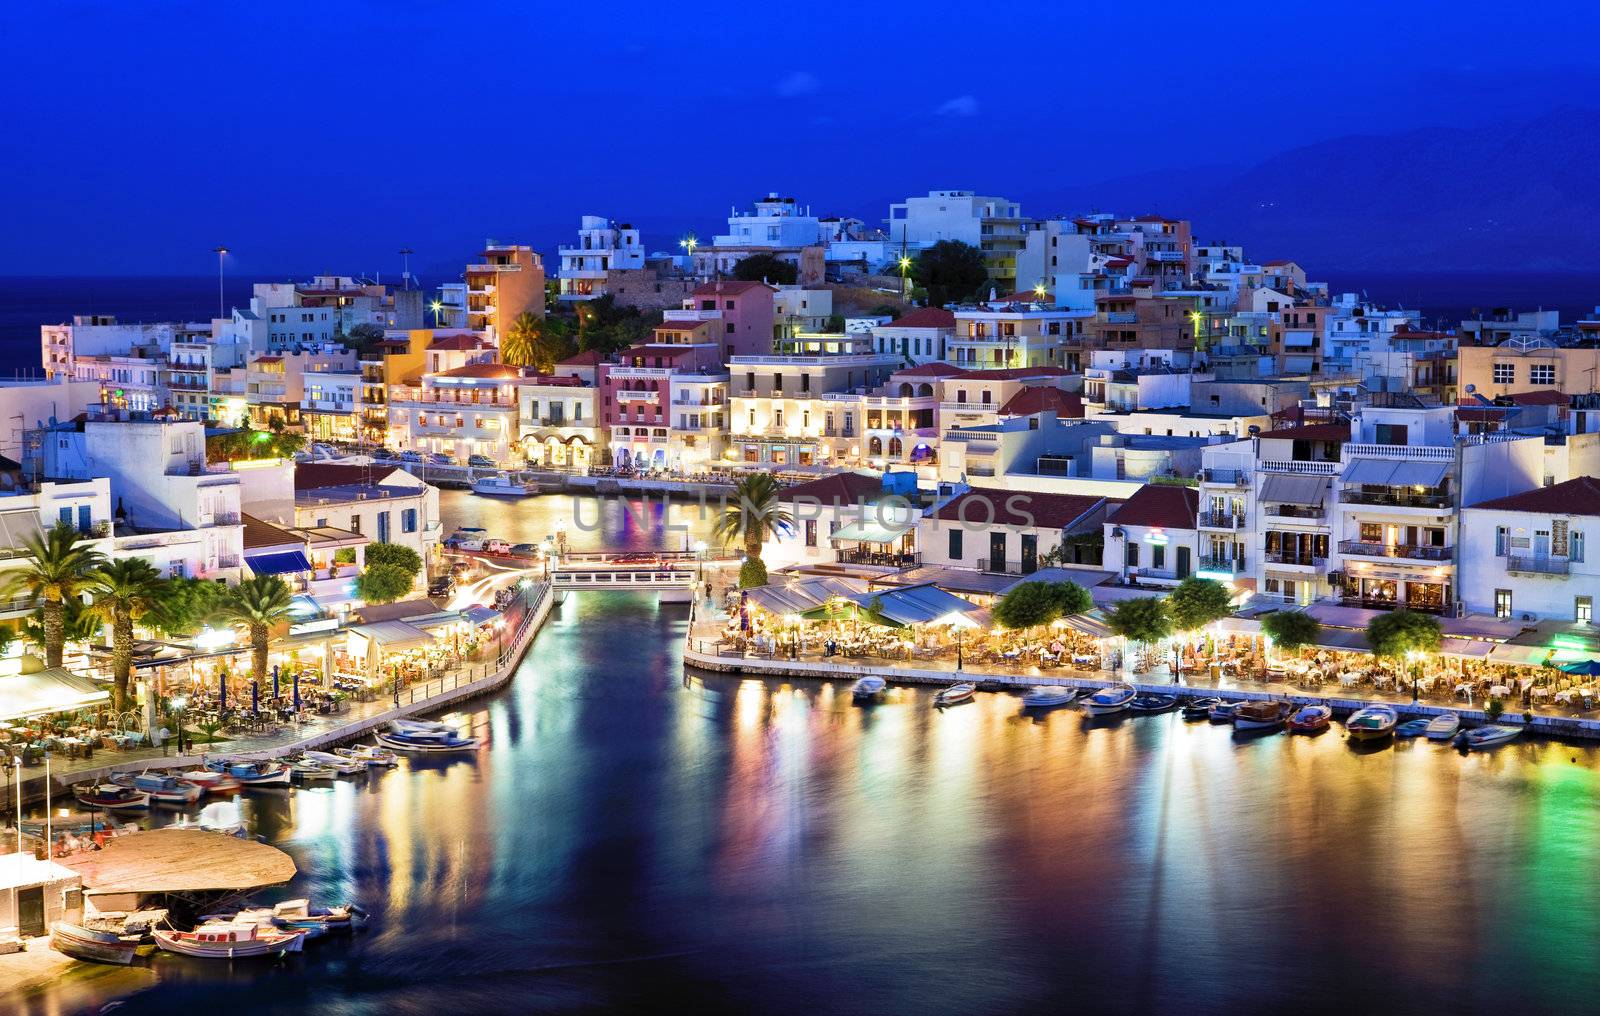 Agios Nikolaos.Agios Nikolaos is a picturesque town in the eastern part of the island Crete built on the northwest side of the peaceful bay of Mirabello.